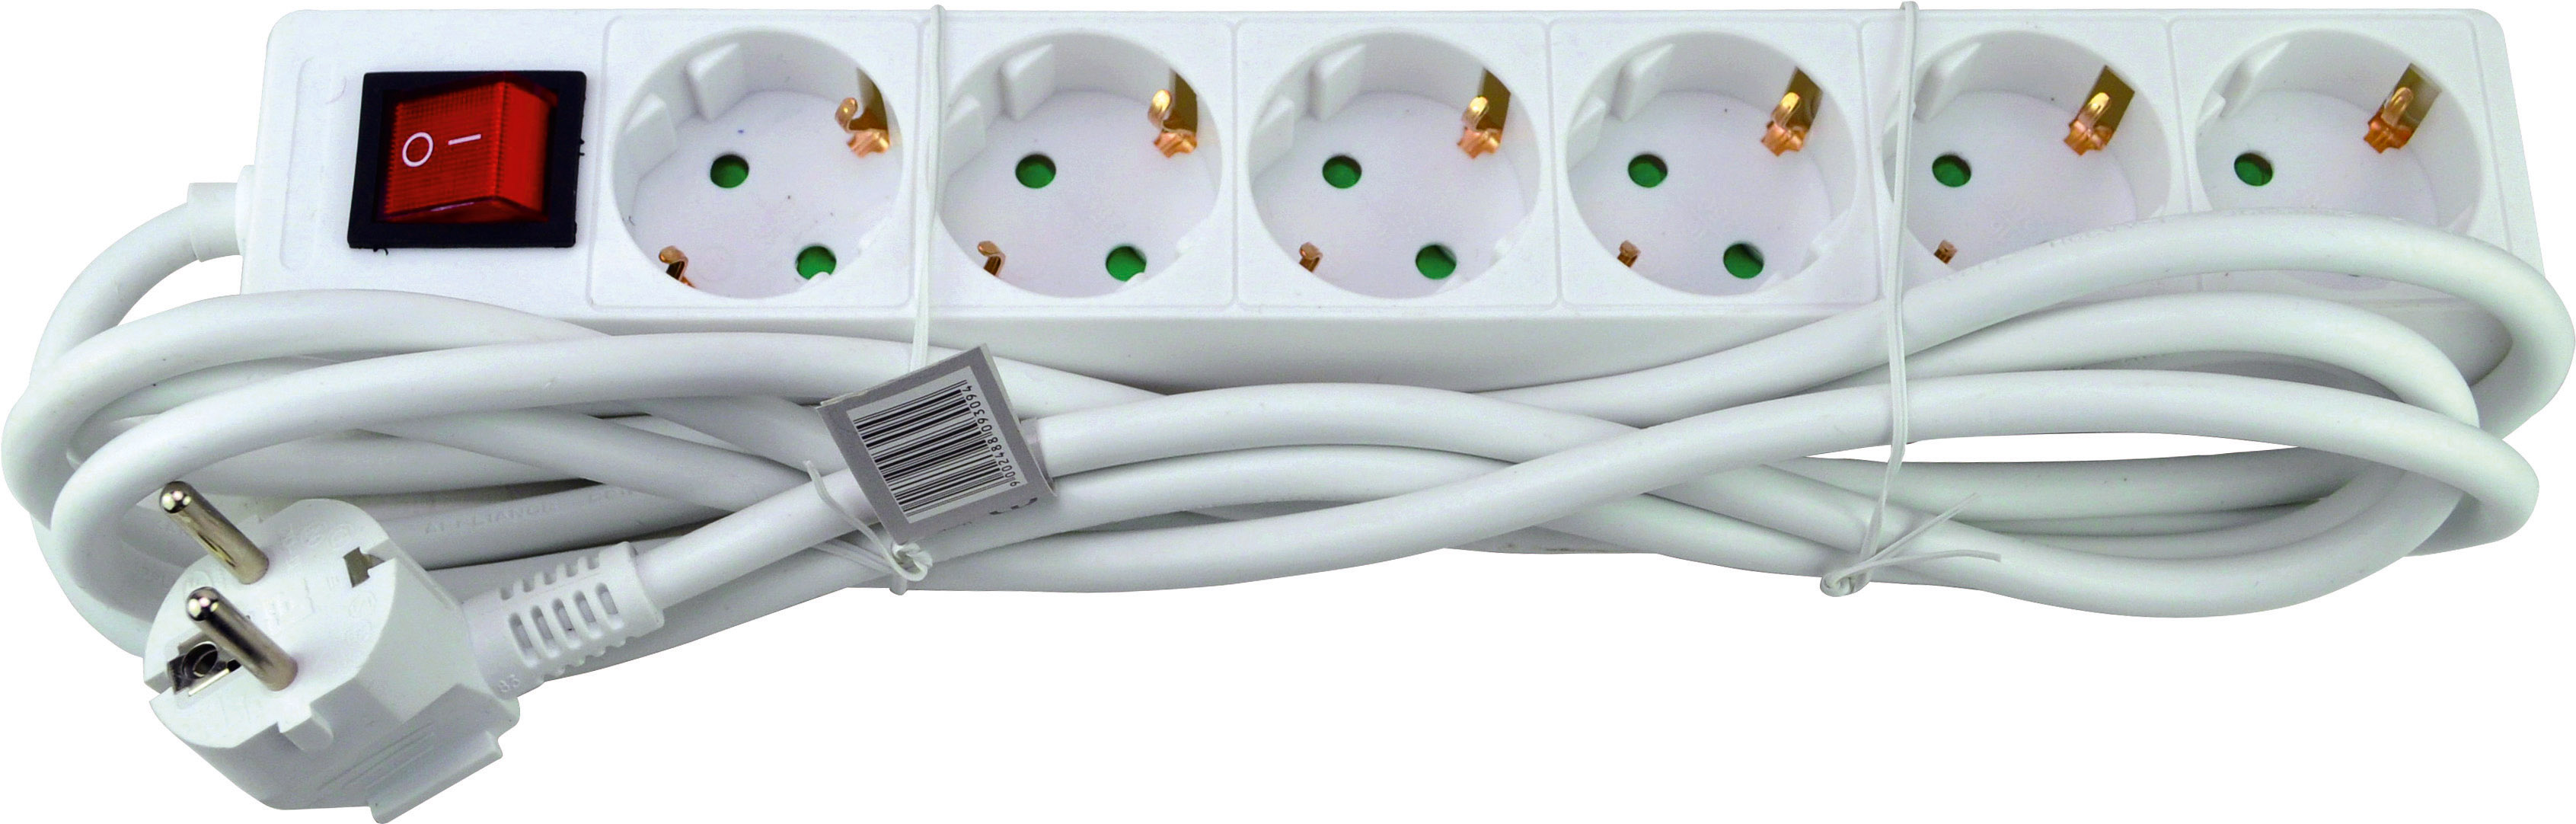 Extension Socket with switch SCHUKO 6-sockets 3 m